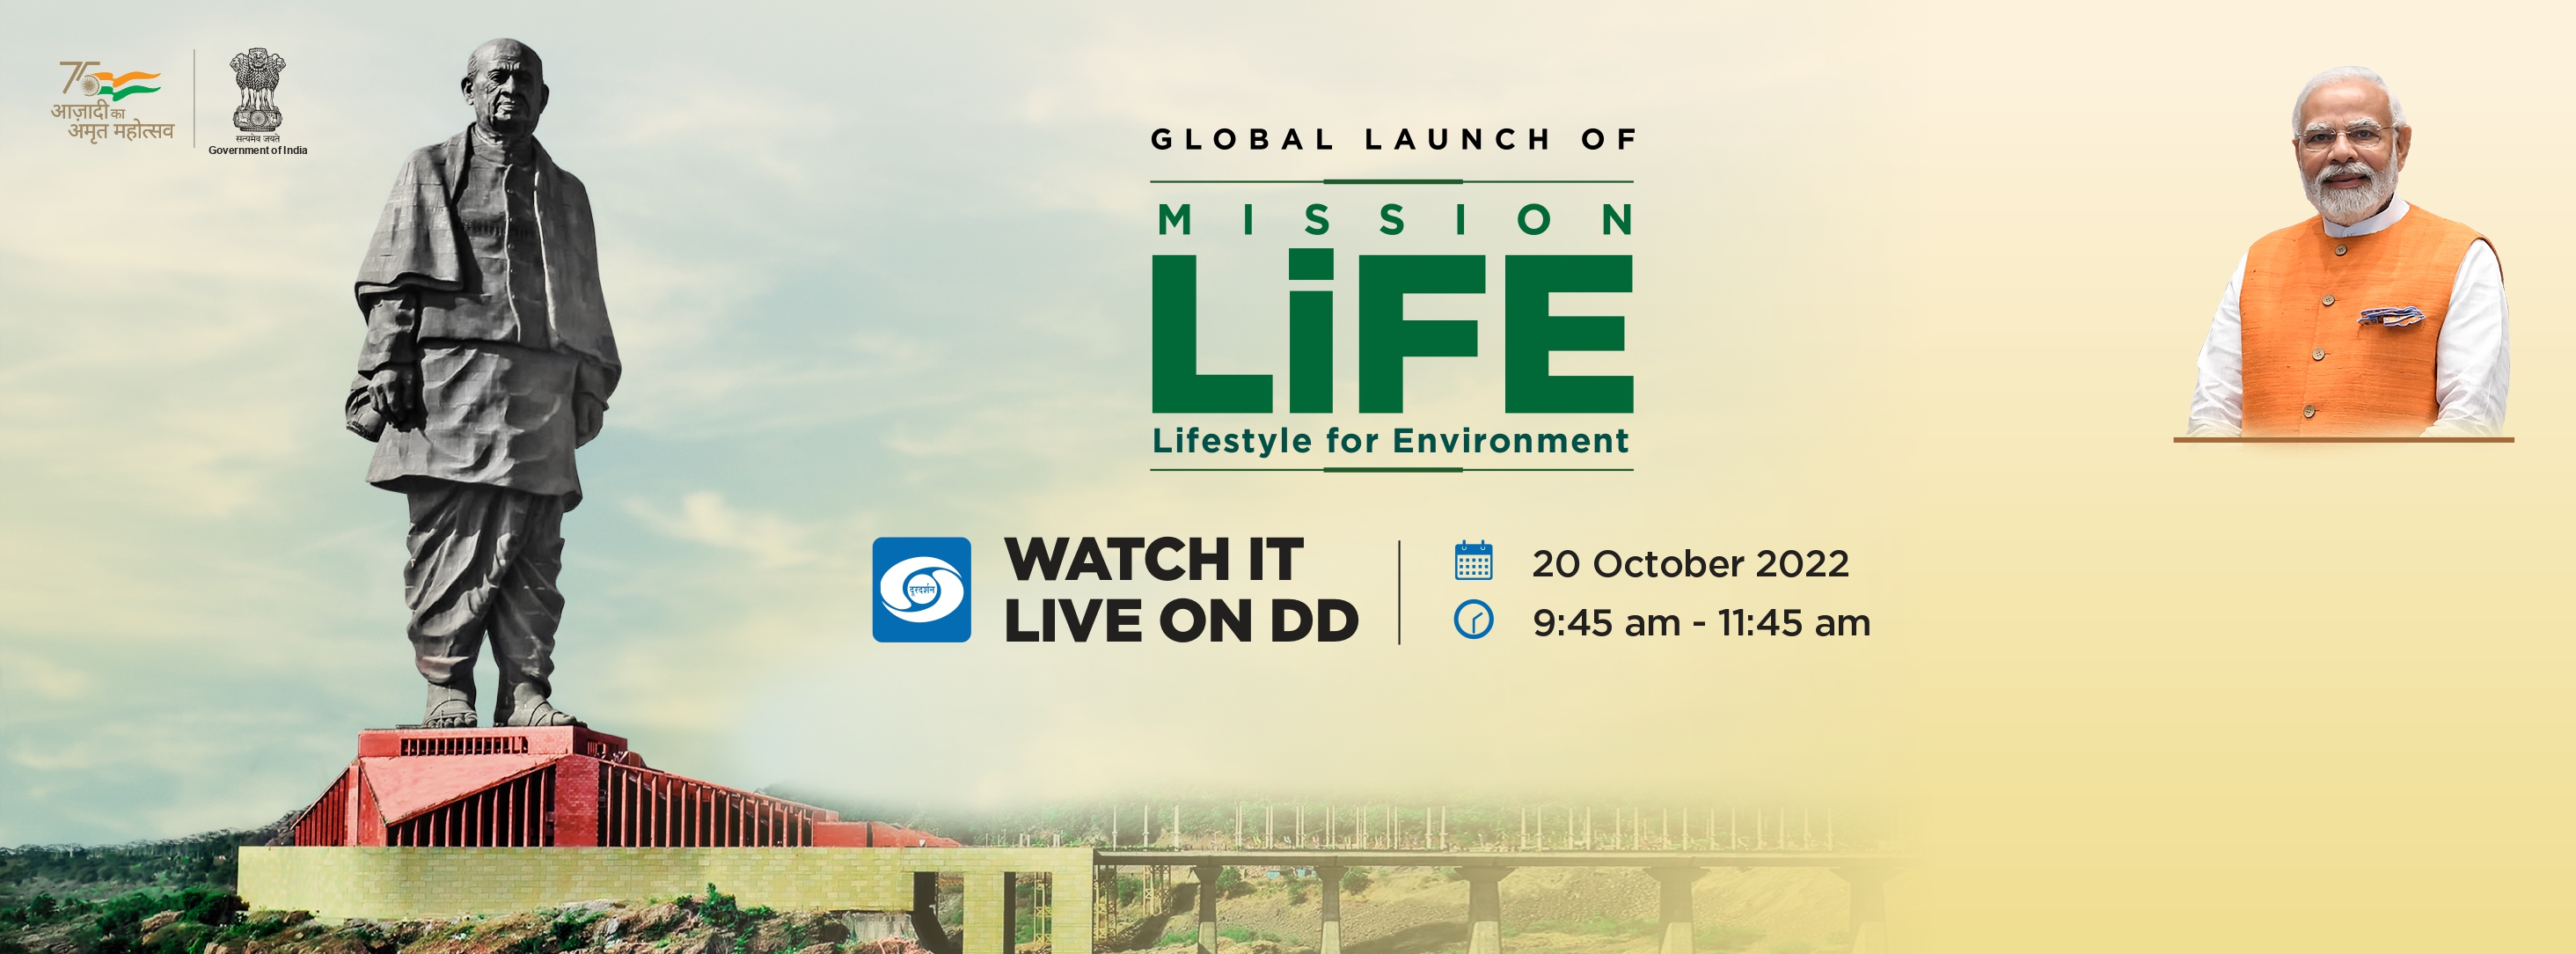  In-person participation at Global Launch of Mission LiFE event on 20th October, 2022